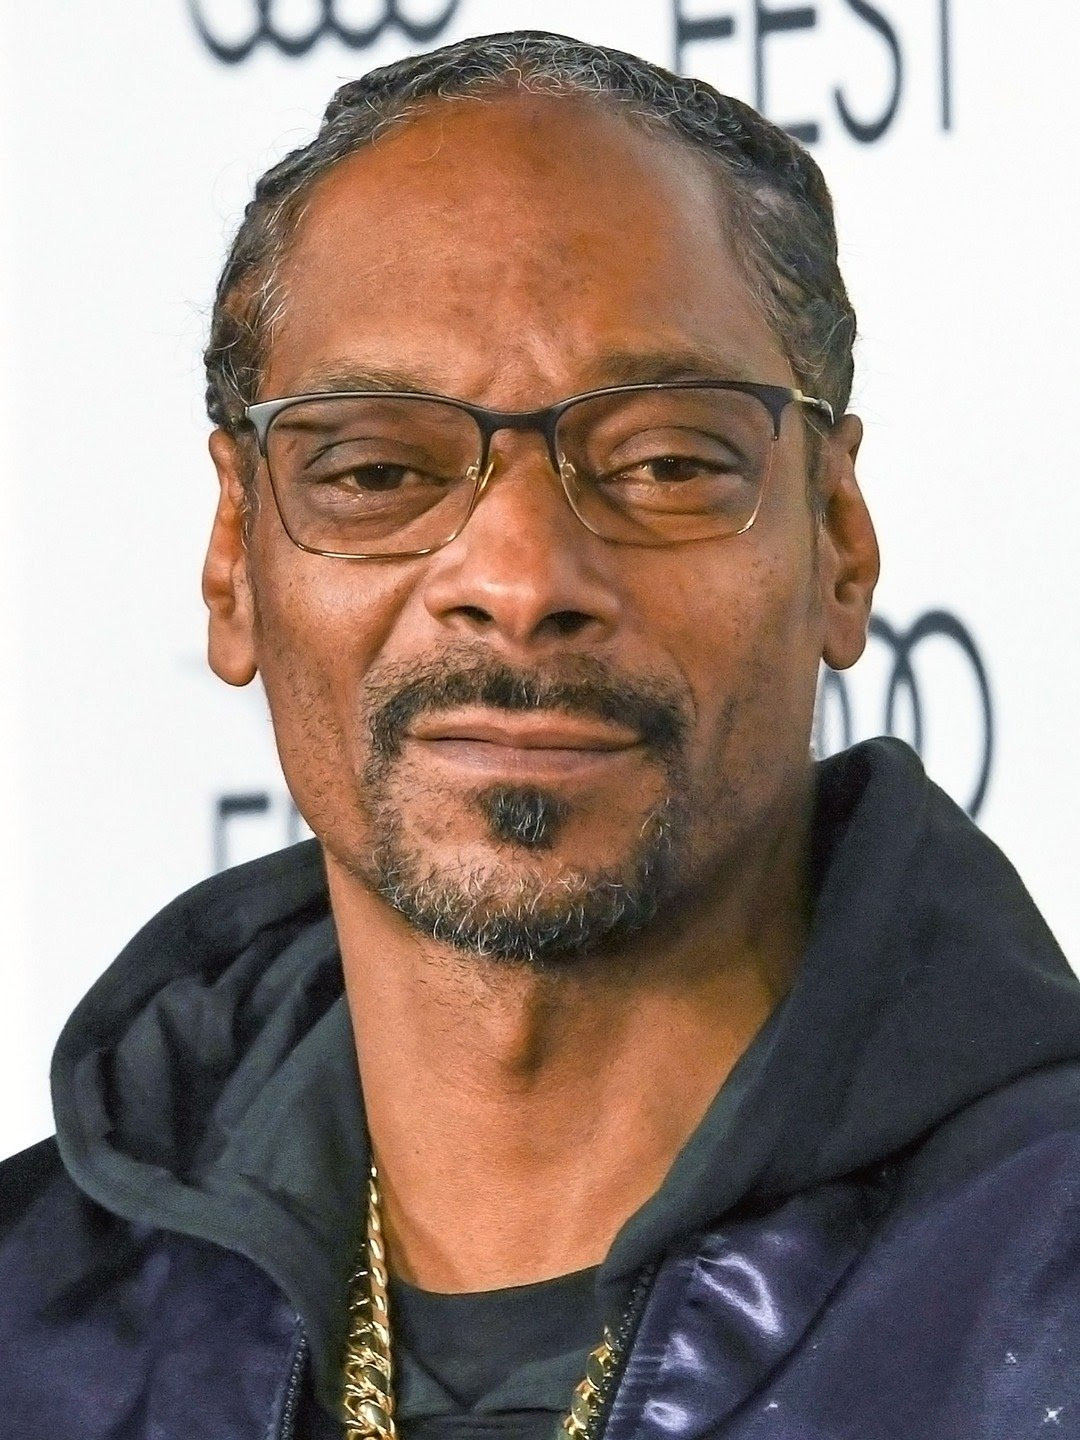 Woman resubmits fresh sexual assault and defamation claims against Snoop Dogg months after withdrawing allegations